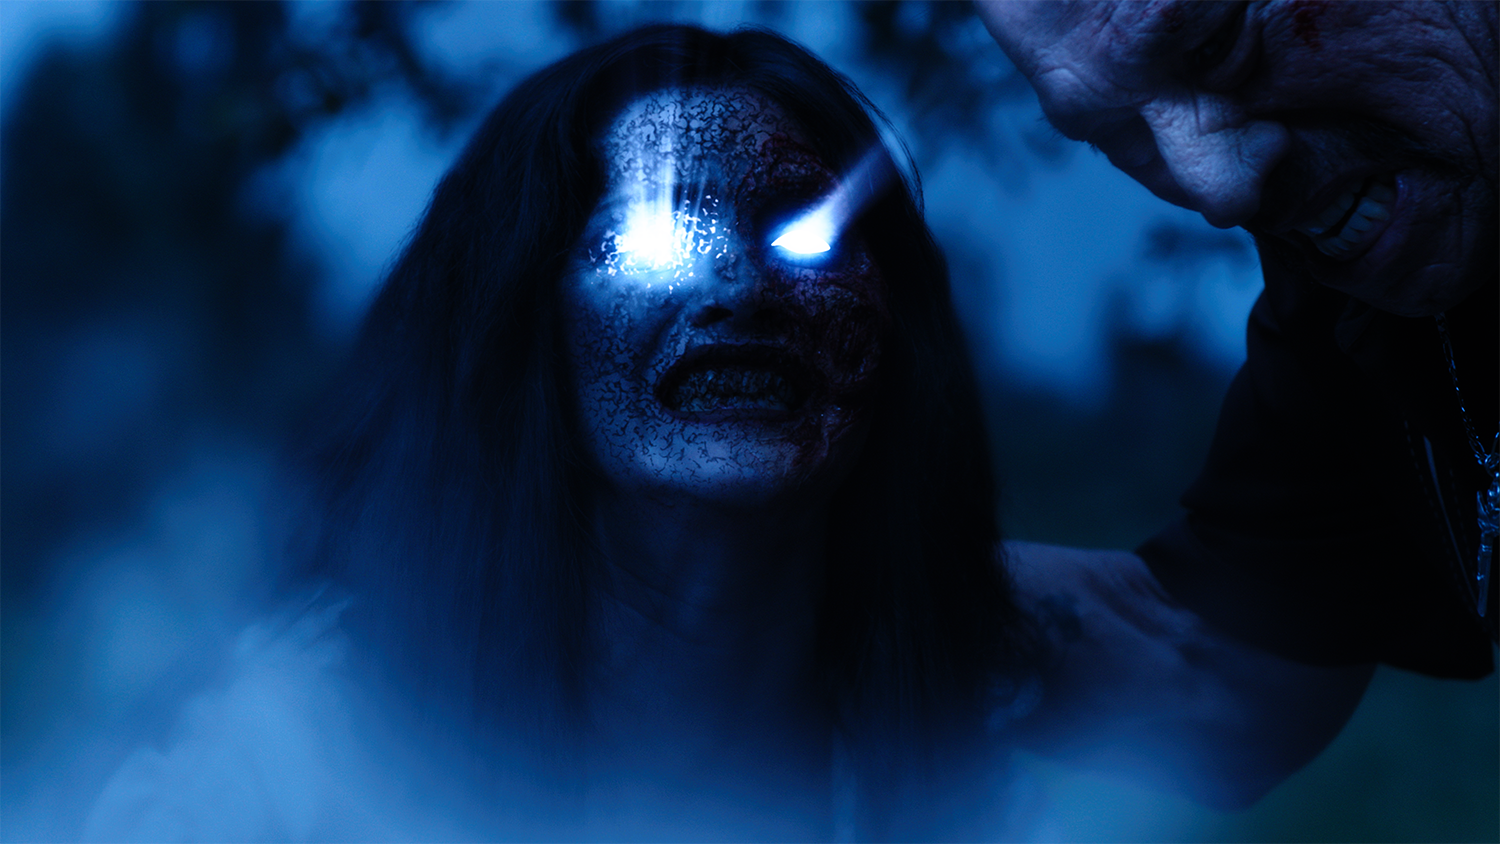 La Llorona is dispatched by Danny Trejo, with VFX completed by Foxtrot X-Ray